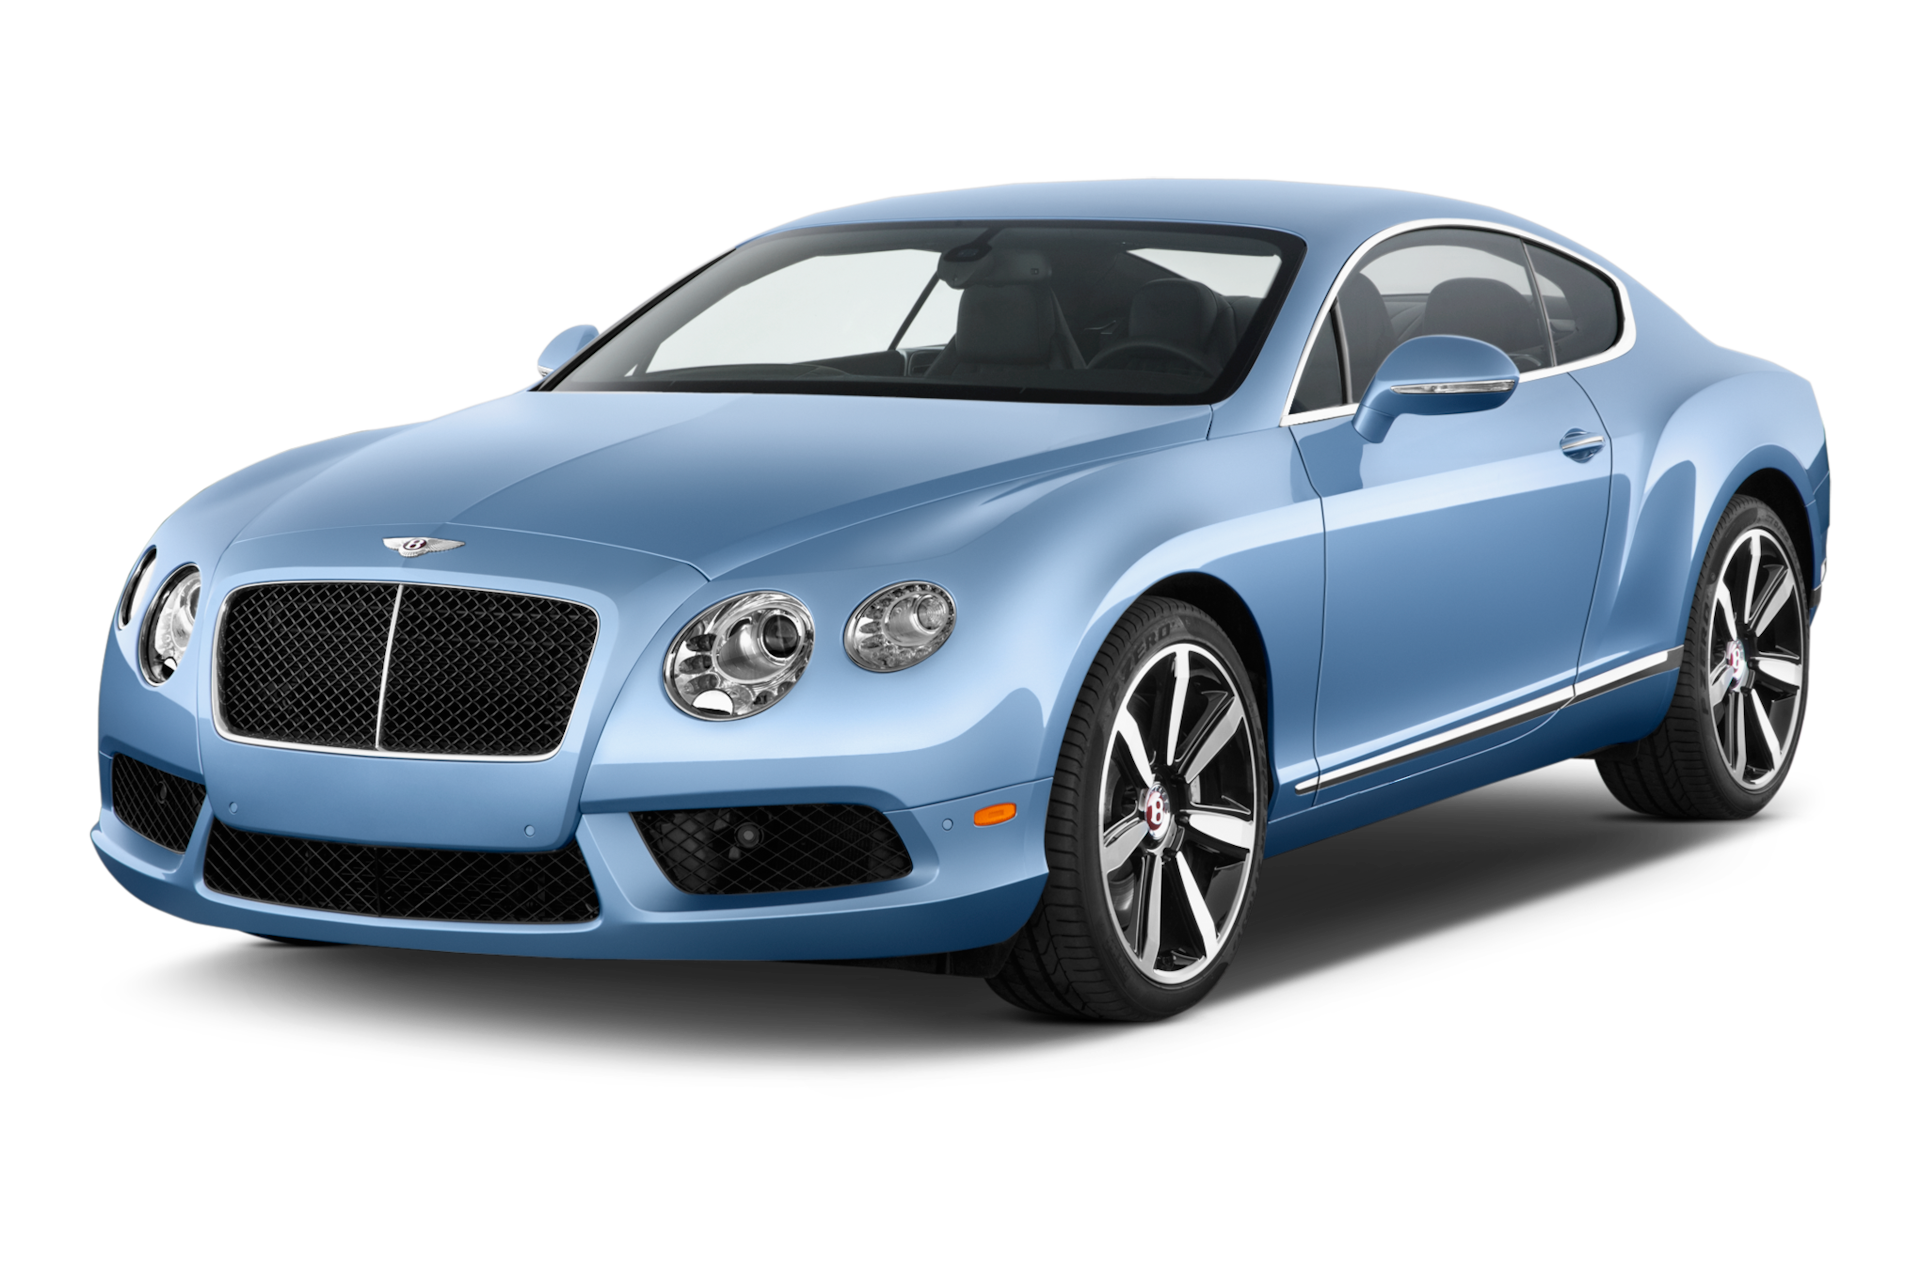 2014 Bentley Continental GT Prices, Reviews, and Photos - MotorTrend